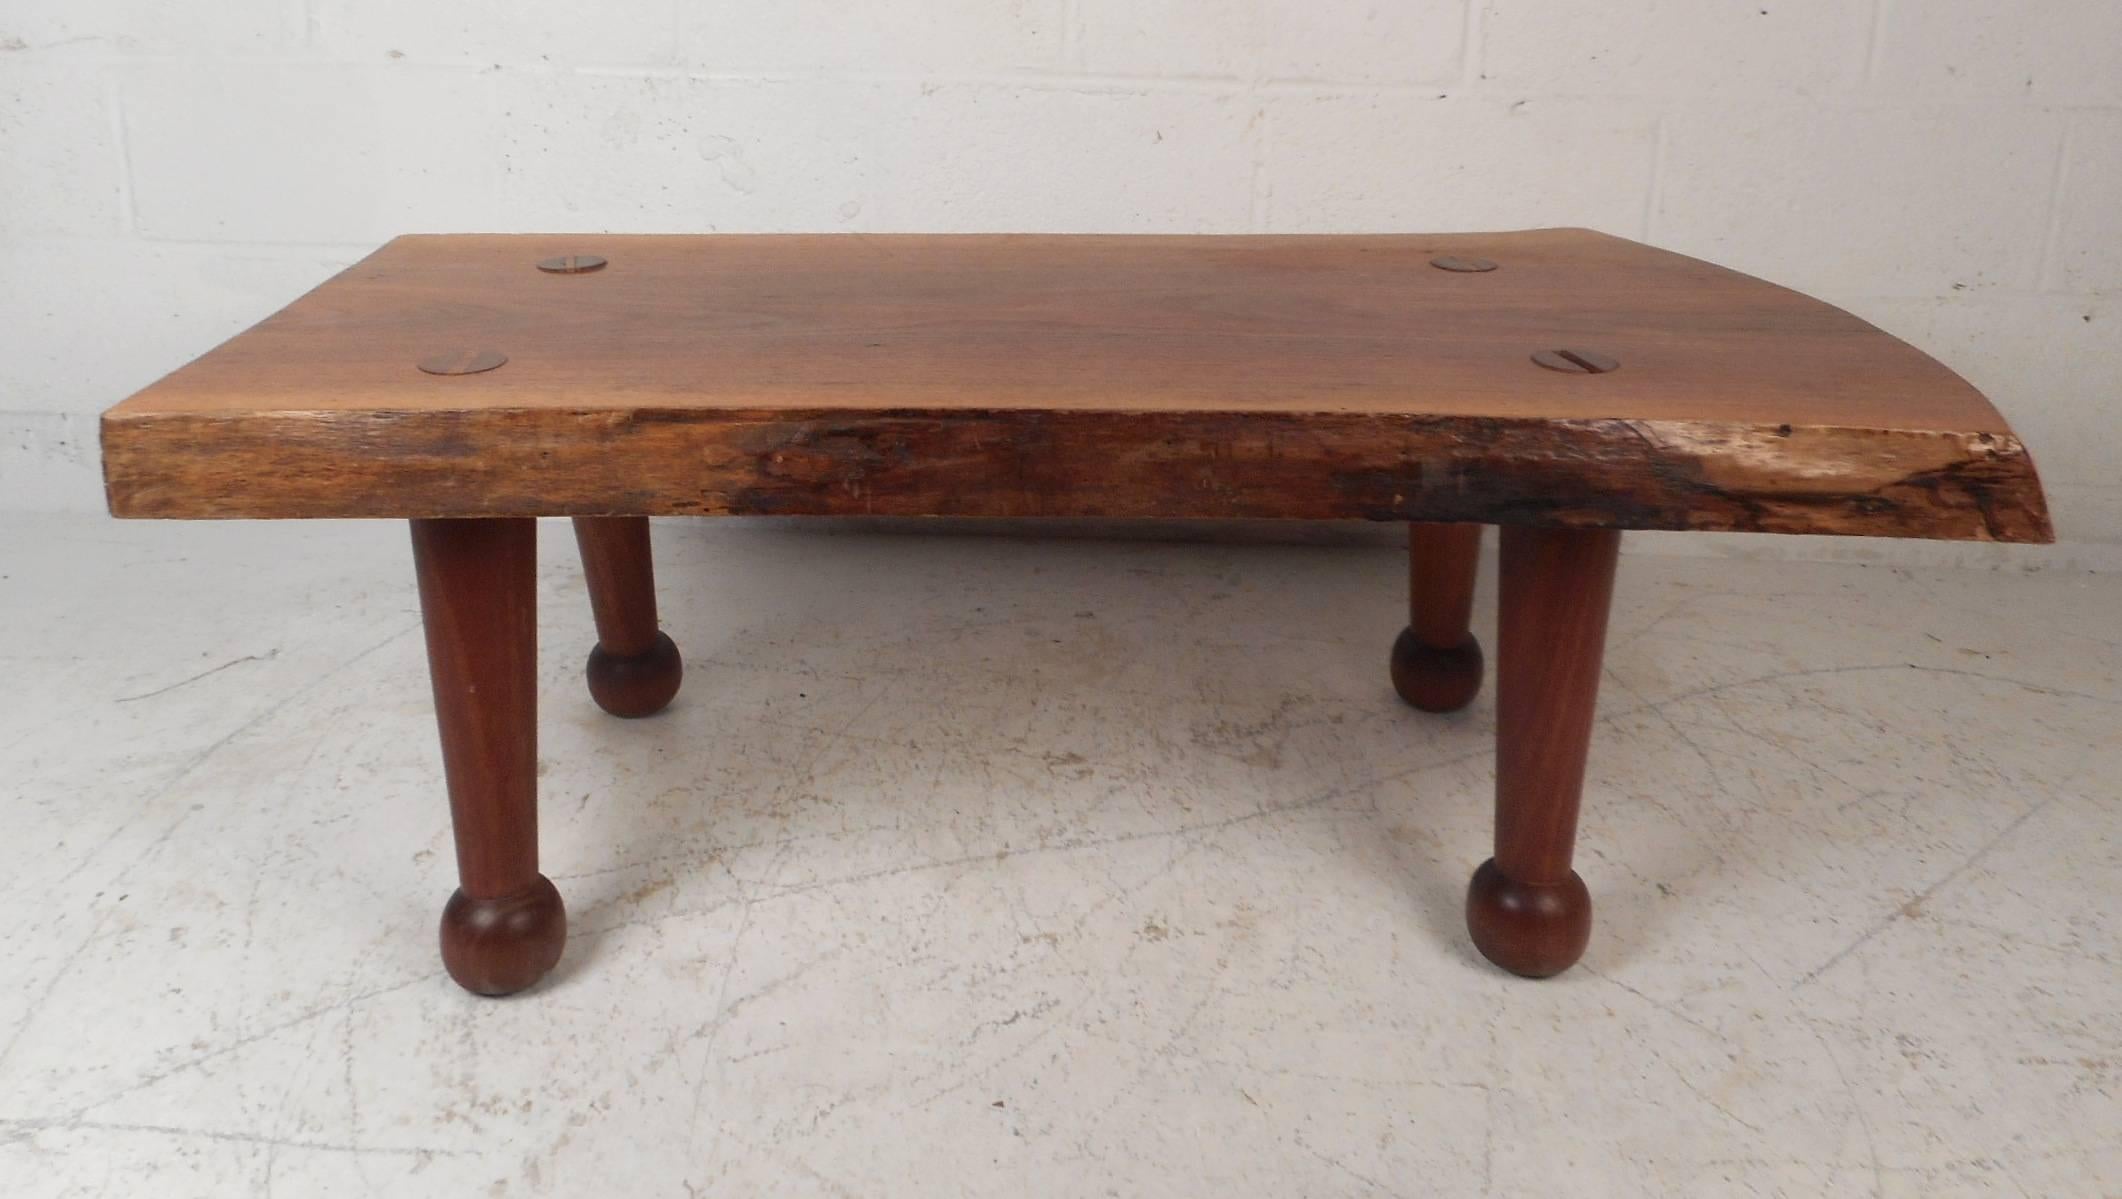 Beautiful Mid-Century Modern live edge coffee table with unusual drum stick legs and a free-form tree slab top. Quality construction with an extremely thick top, sturdy sculpted legs, and natural wood grain. This fabulous coffee table makes the